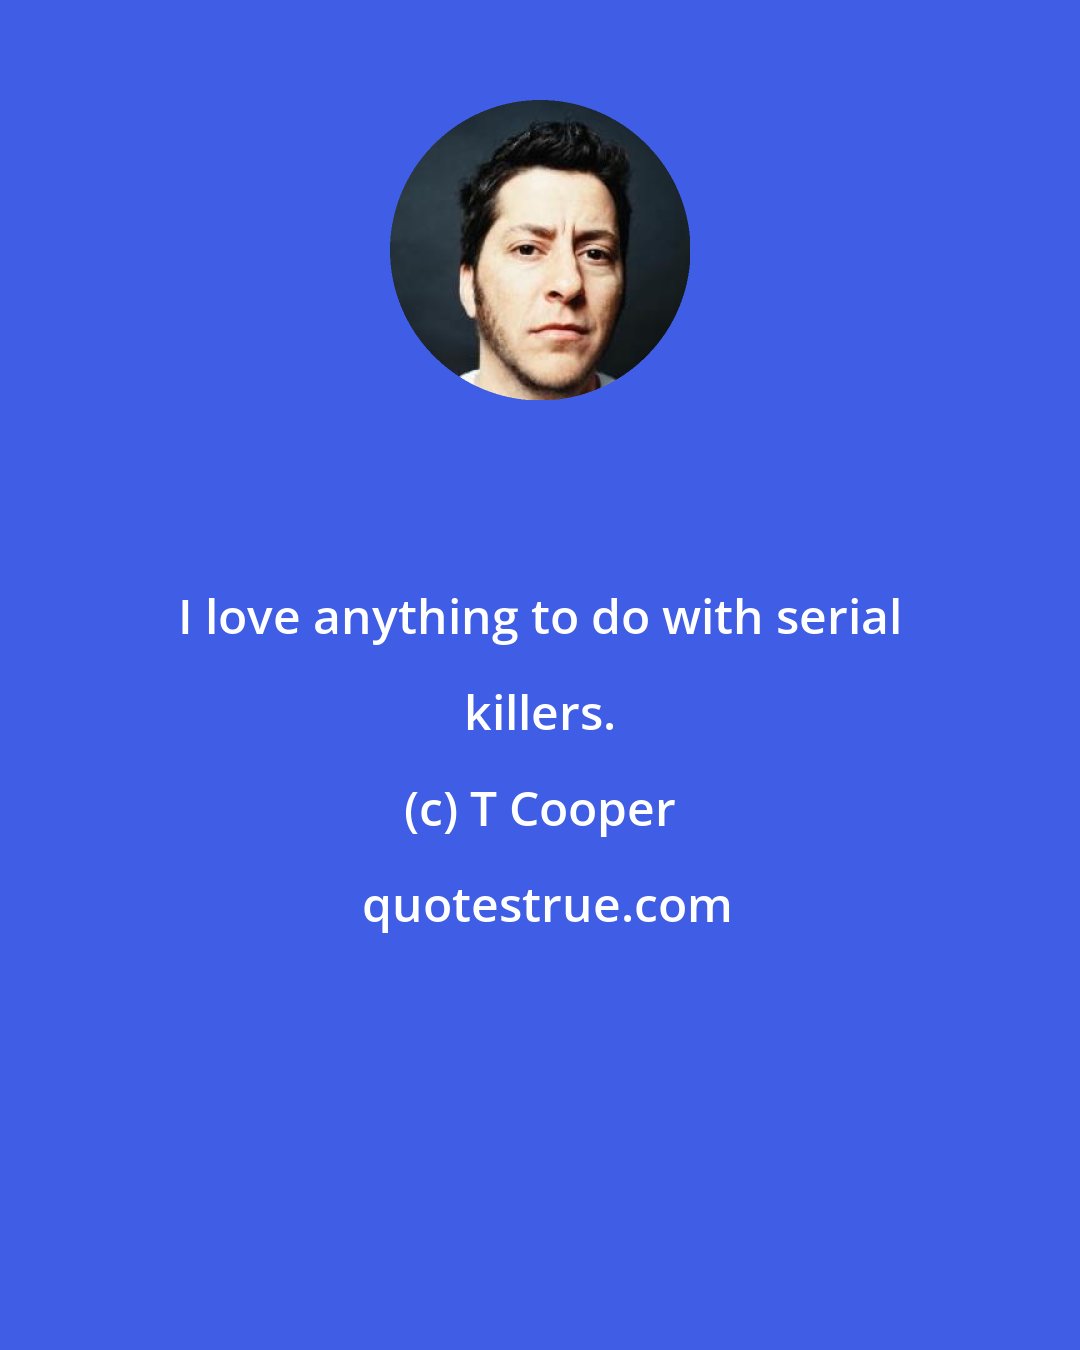 T Cooper: I love anything to do with serial killers.